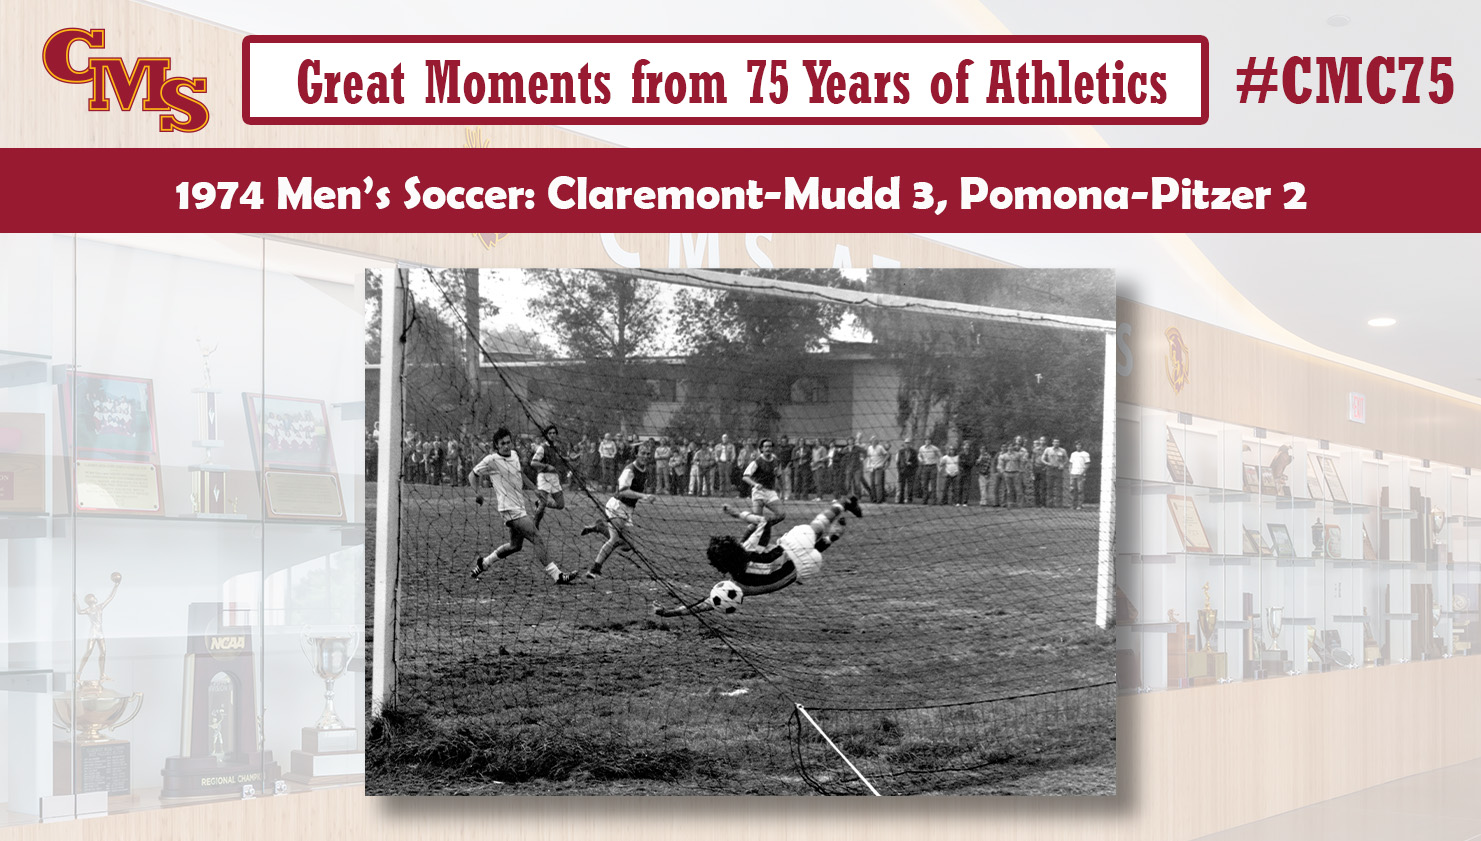 John Pritzlaff scores the first goal of the CMS comeback. Words over the photo read: Great Moments from 75 Years of Athletics, 1974 Men's Soccer: Claremont-Mudd 3, Pomona-Pitzer 2